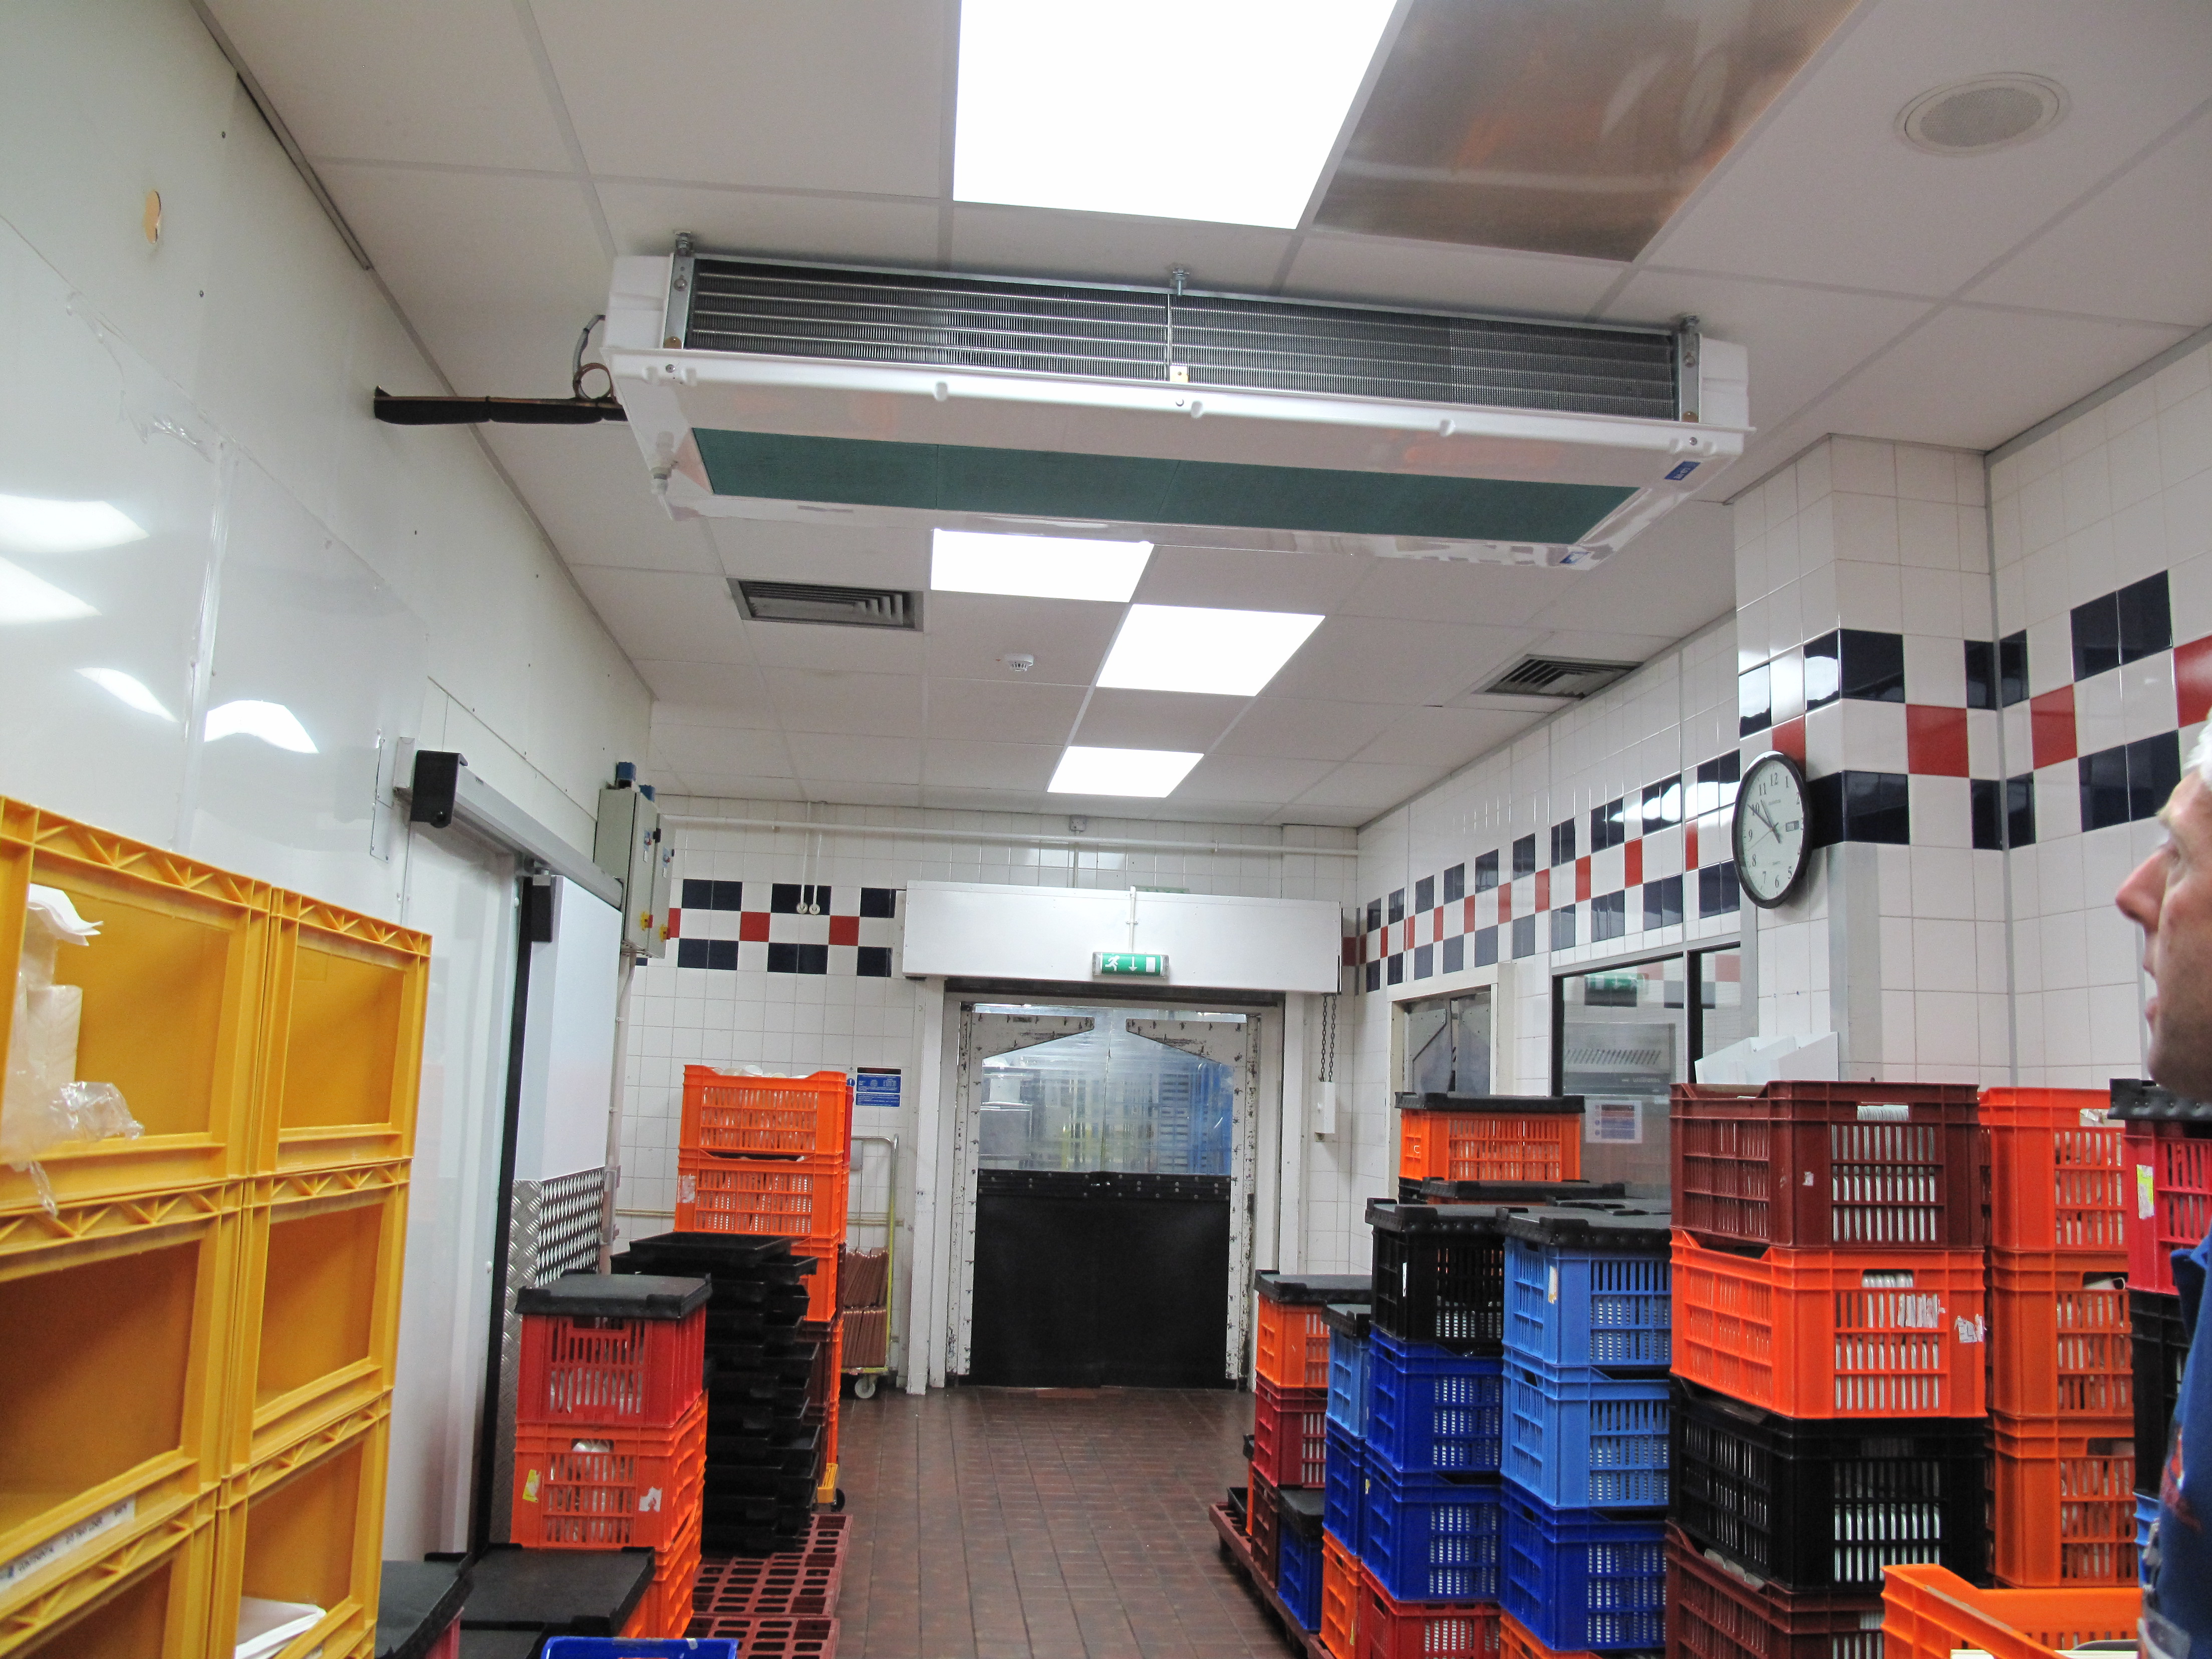 UK catering facility with SHDS cooler - Birmingham
